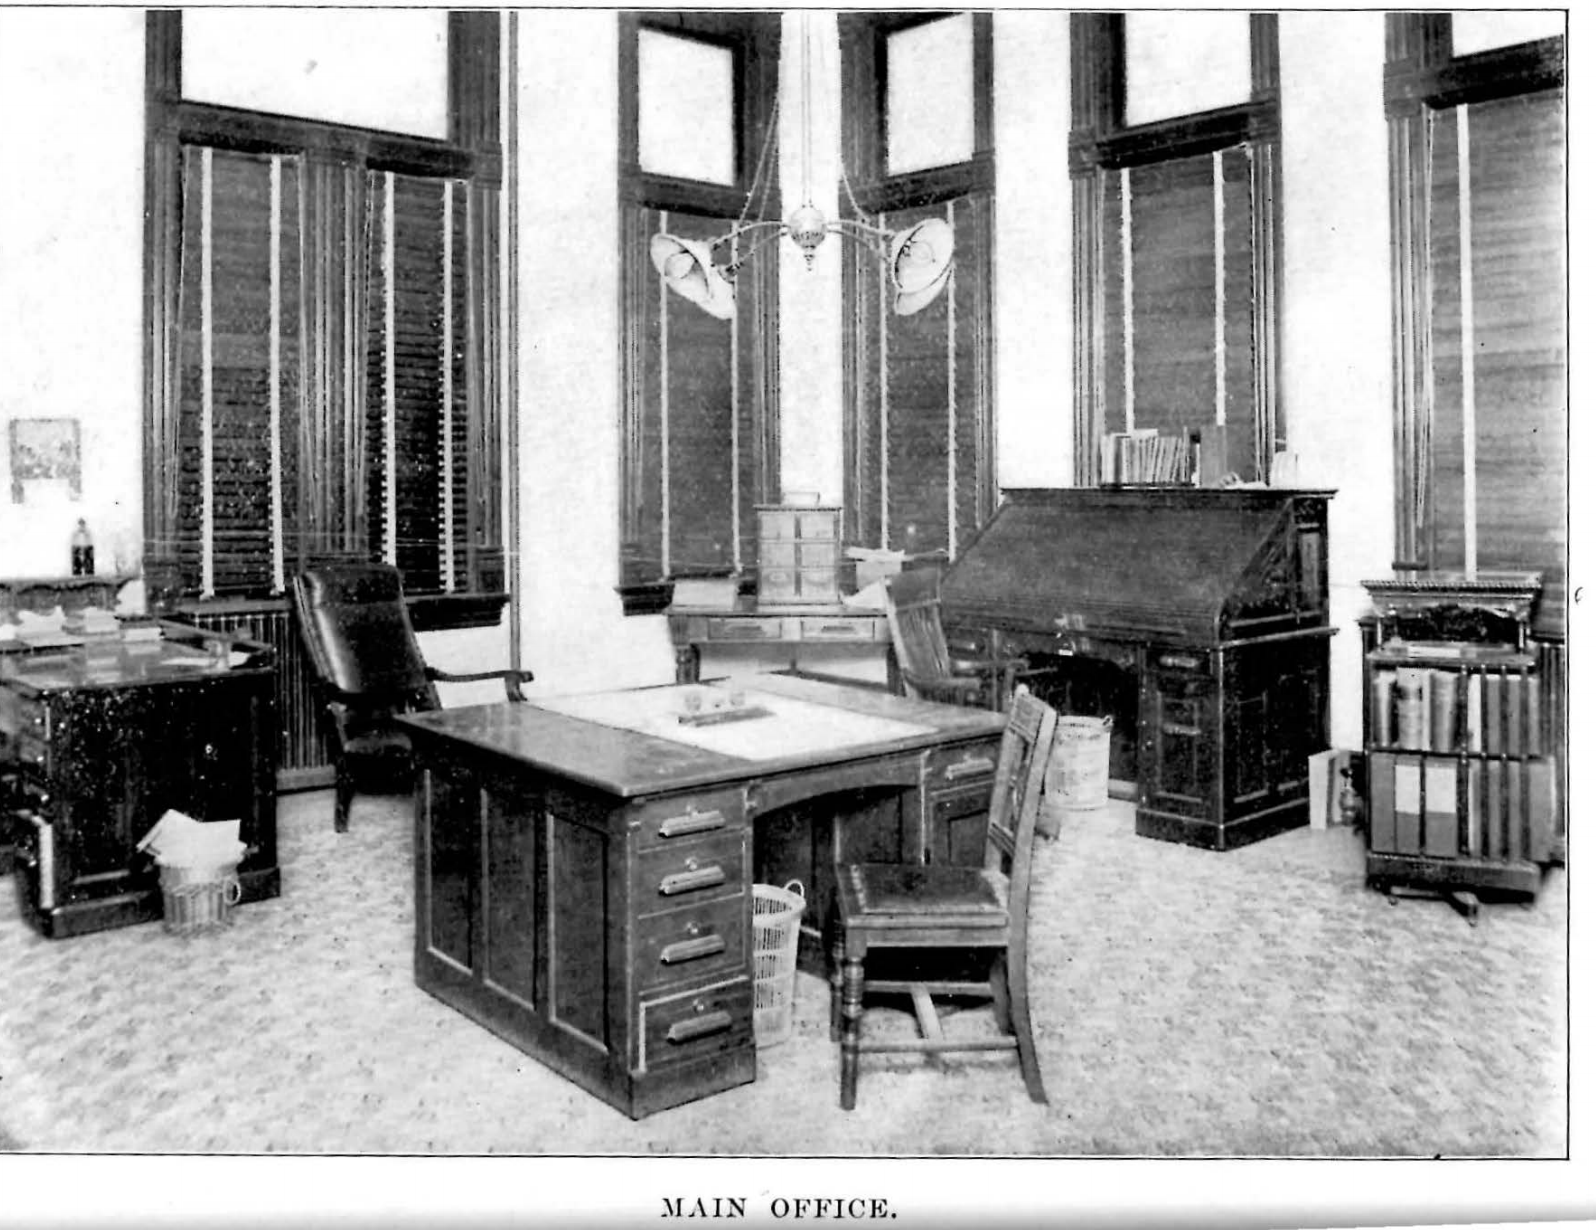 An image of a CWU office with desks from the 1900-01 CWU Catalogue. There are three desks in the room and several windows.